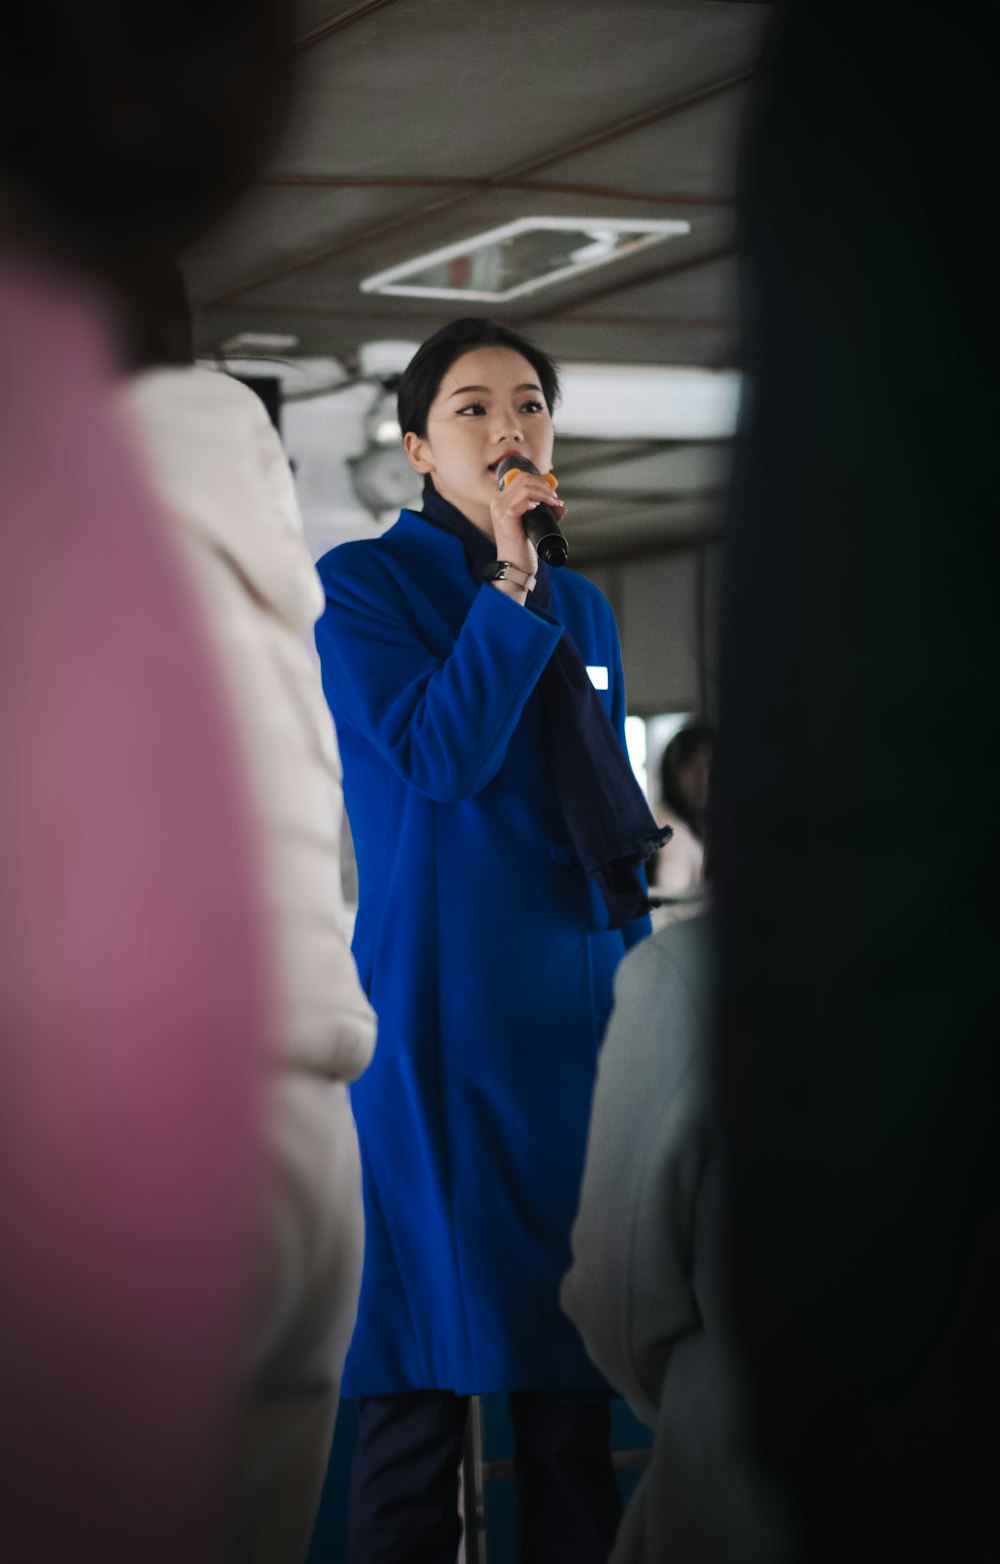 a woman in a blue coat standing in front of a mirror